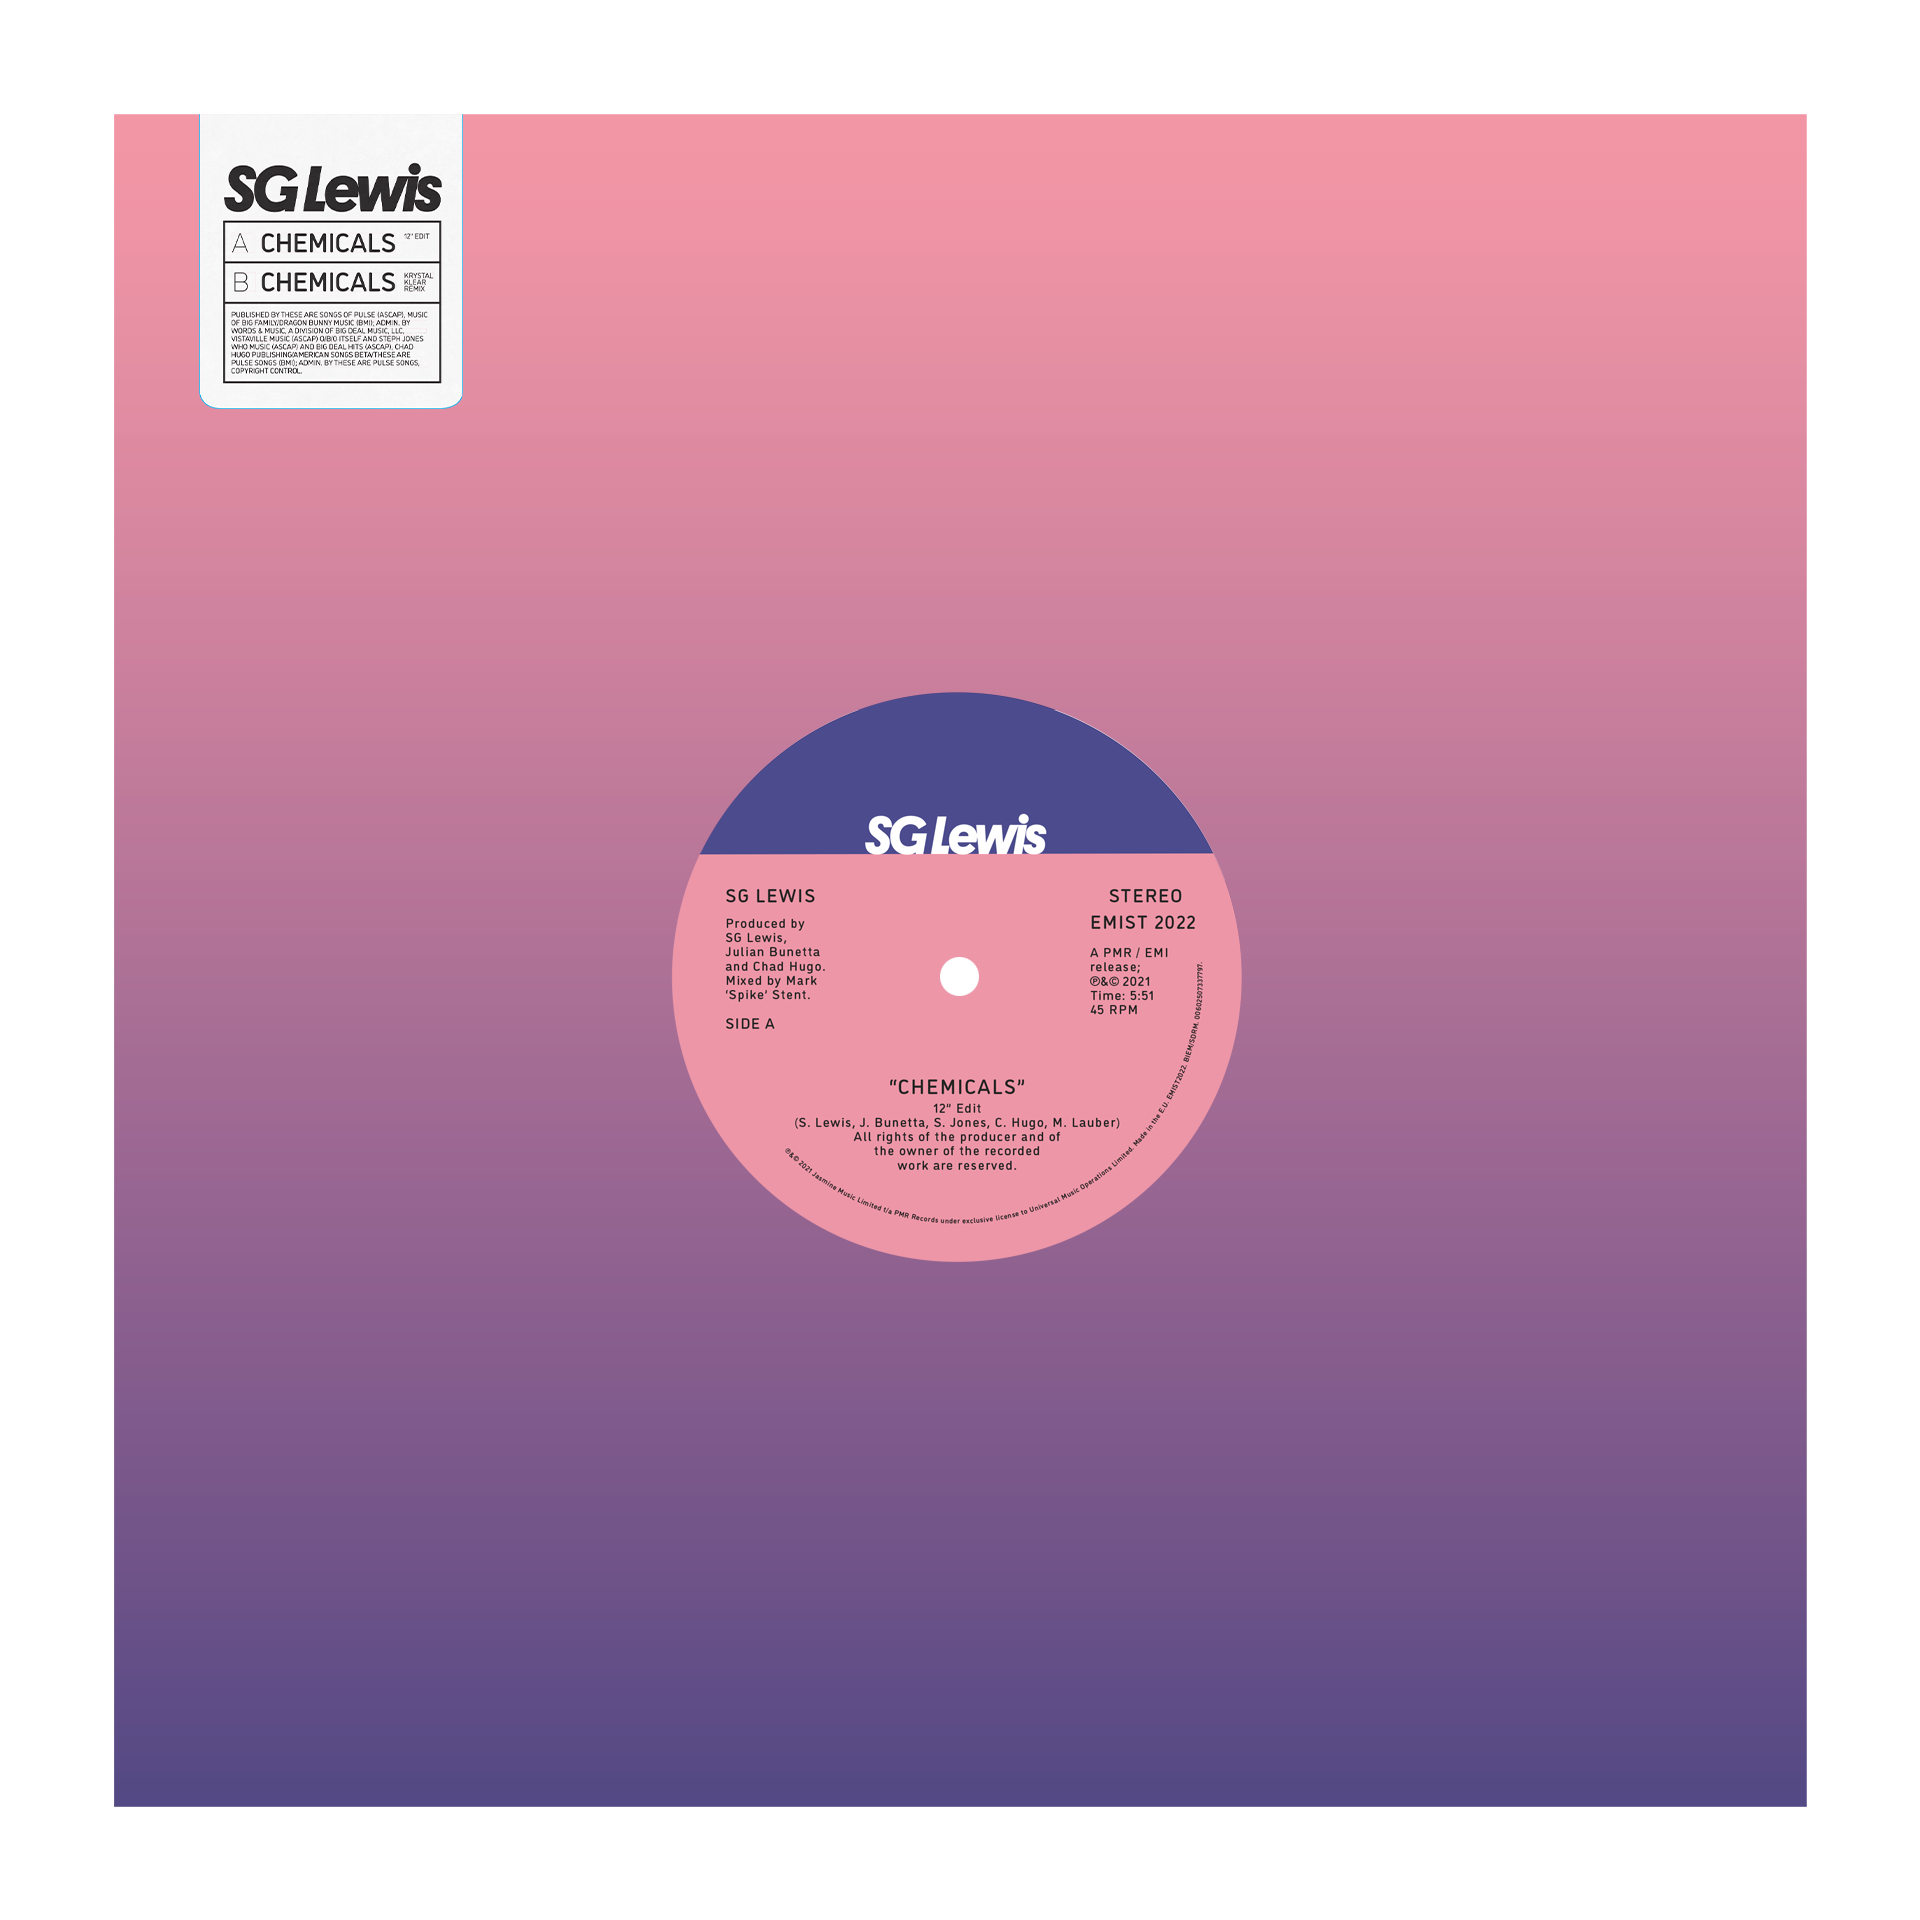 SG Lewis - Limited Edition Chemicals 12” Vinyl